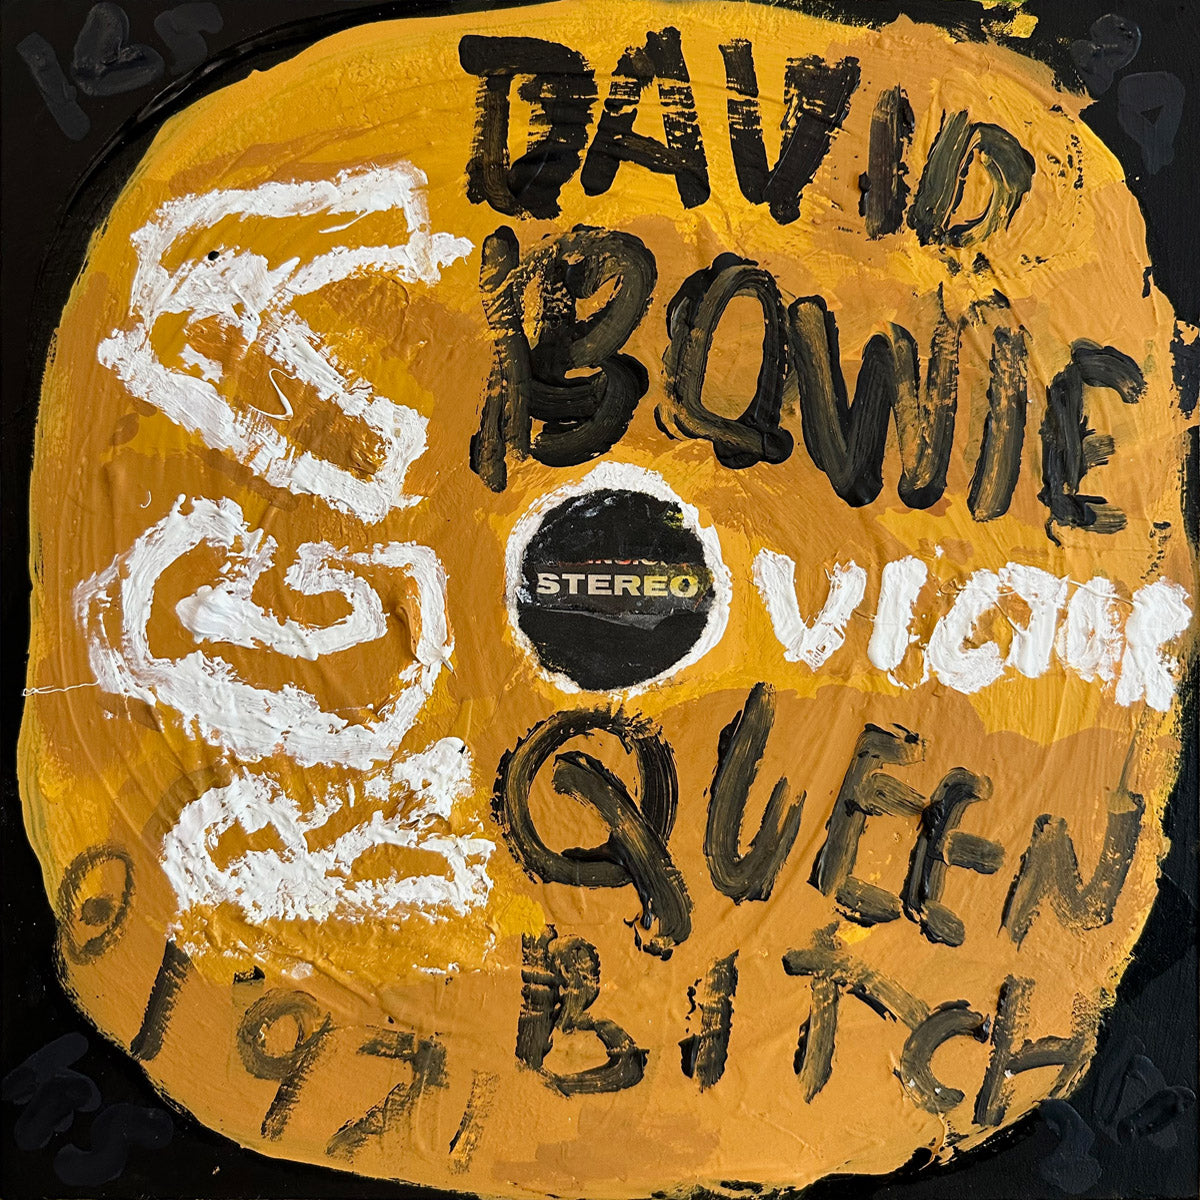 David Bowie / Queen Bitch Kerry Smith